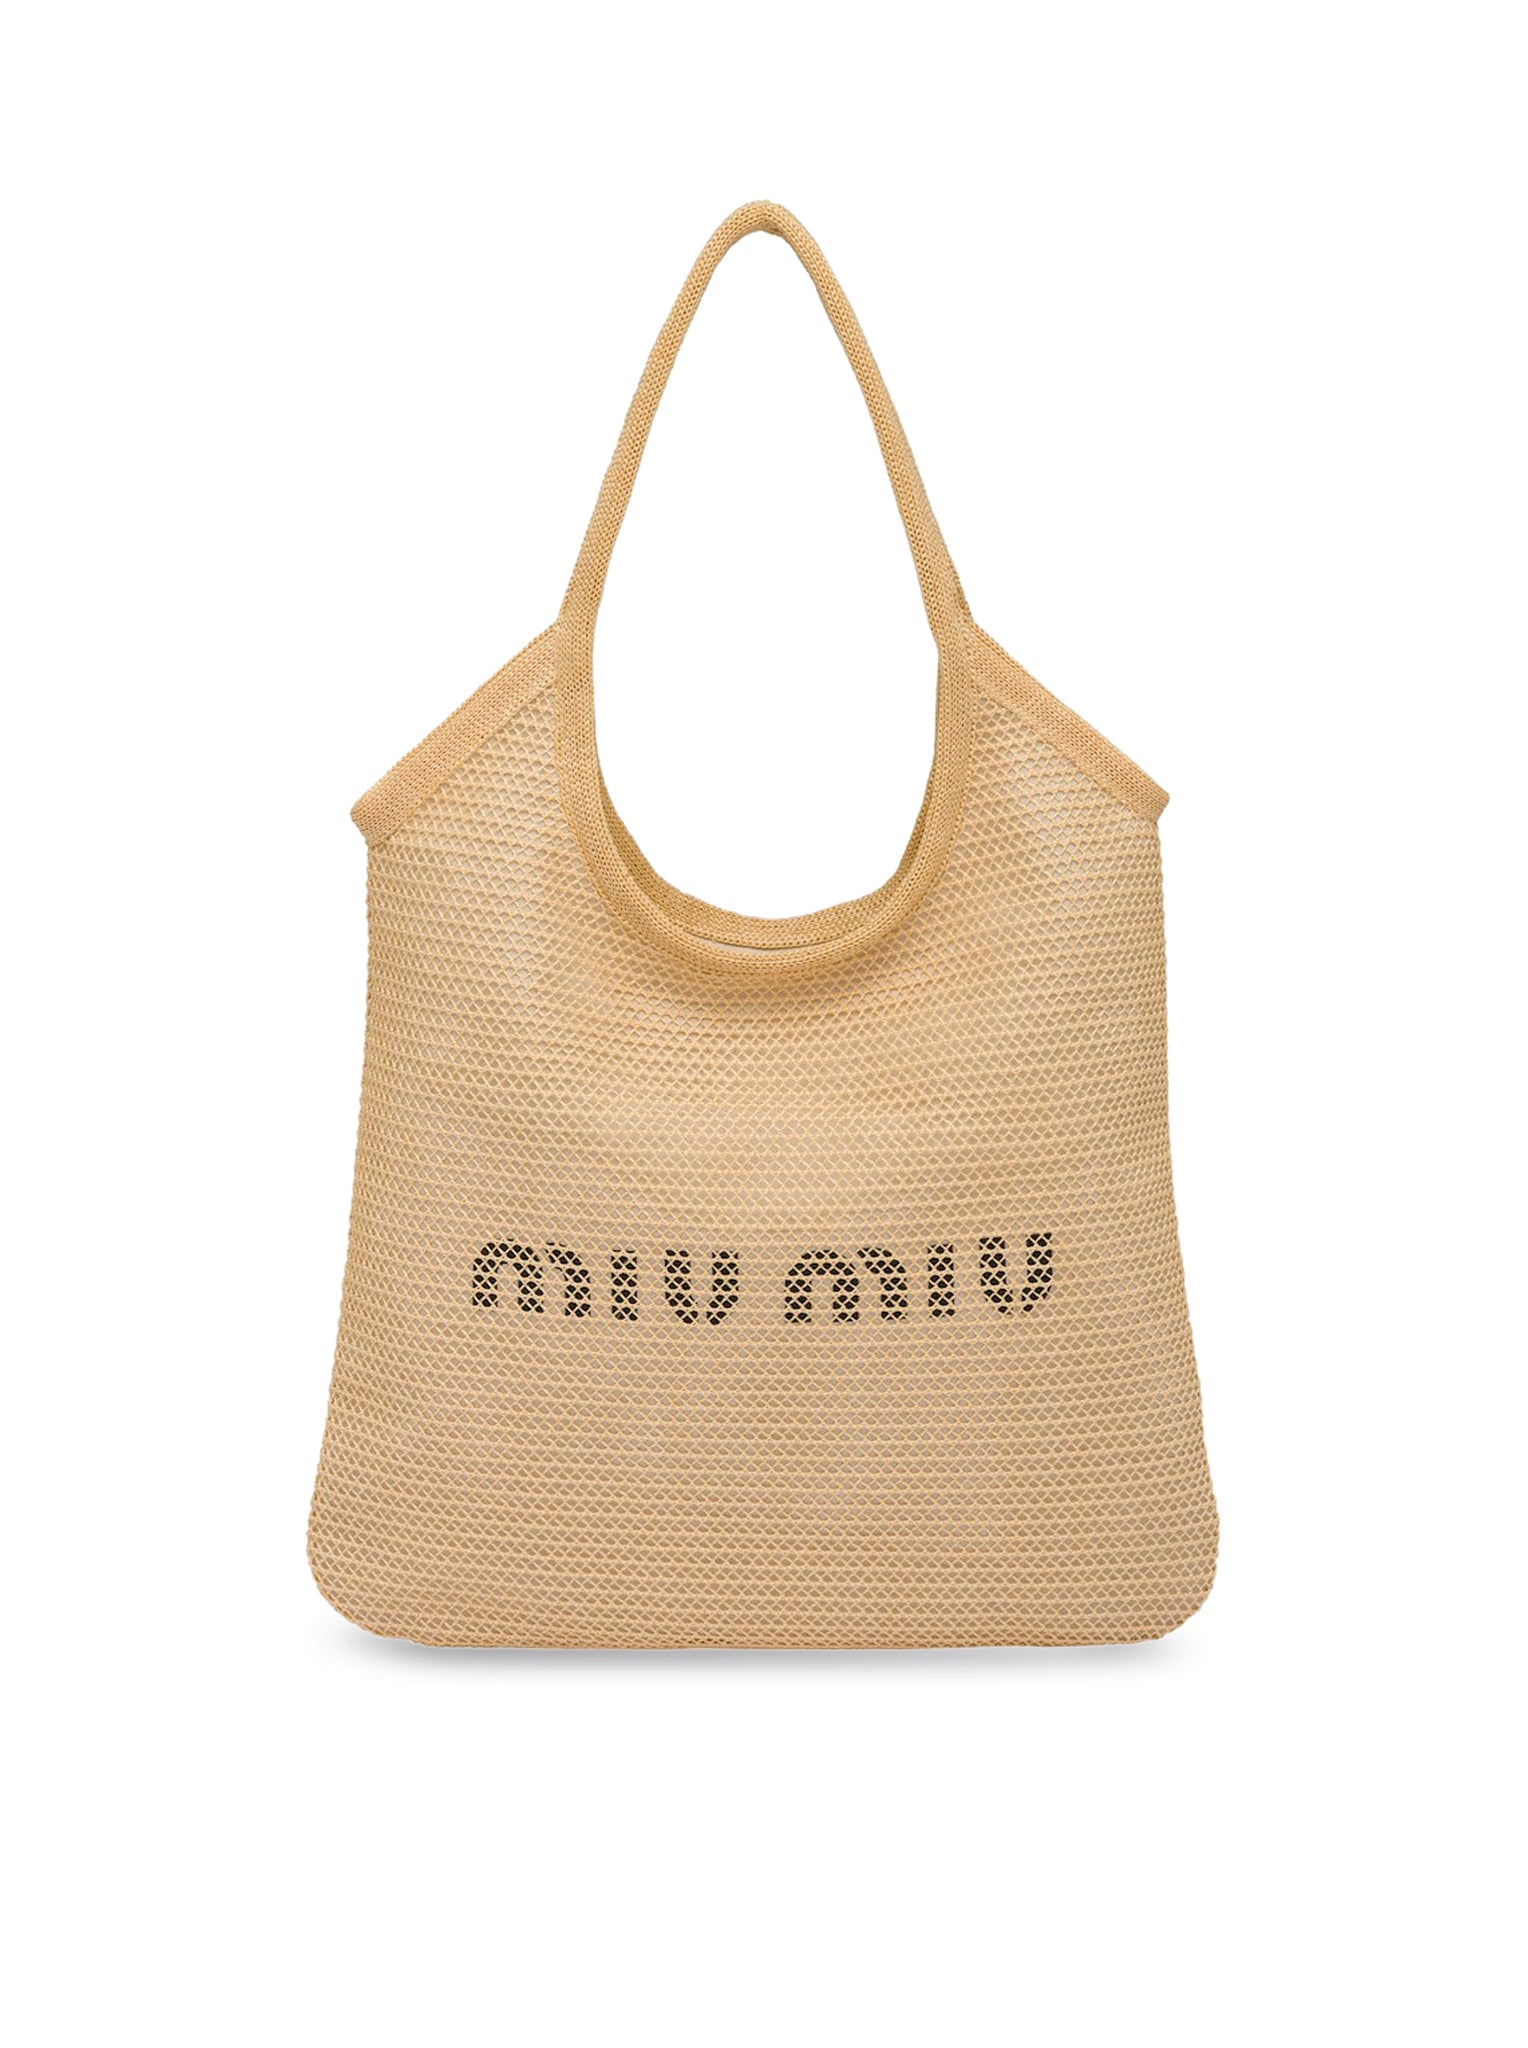 Shopping bag in fabric and linen